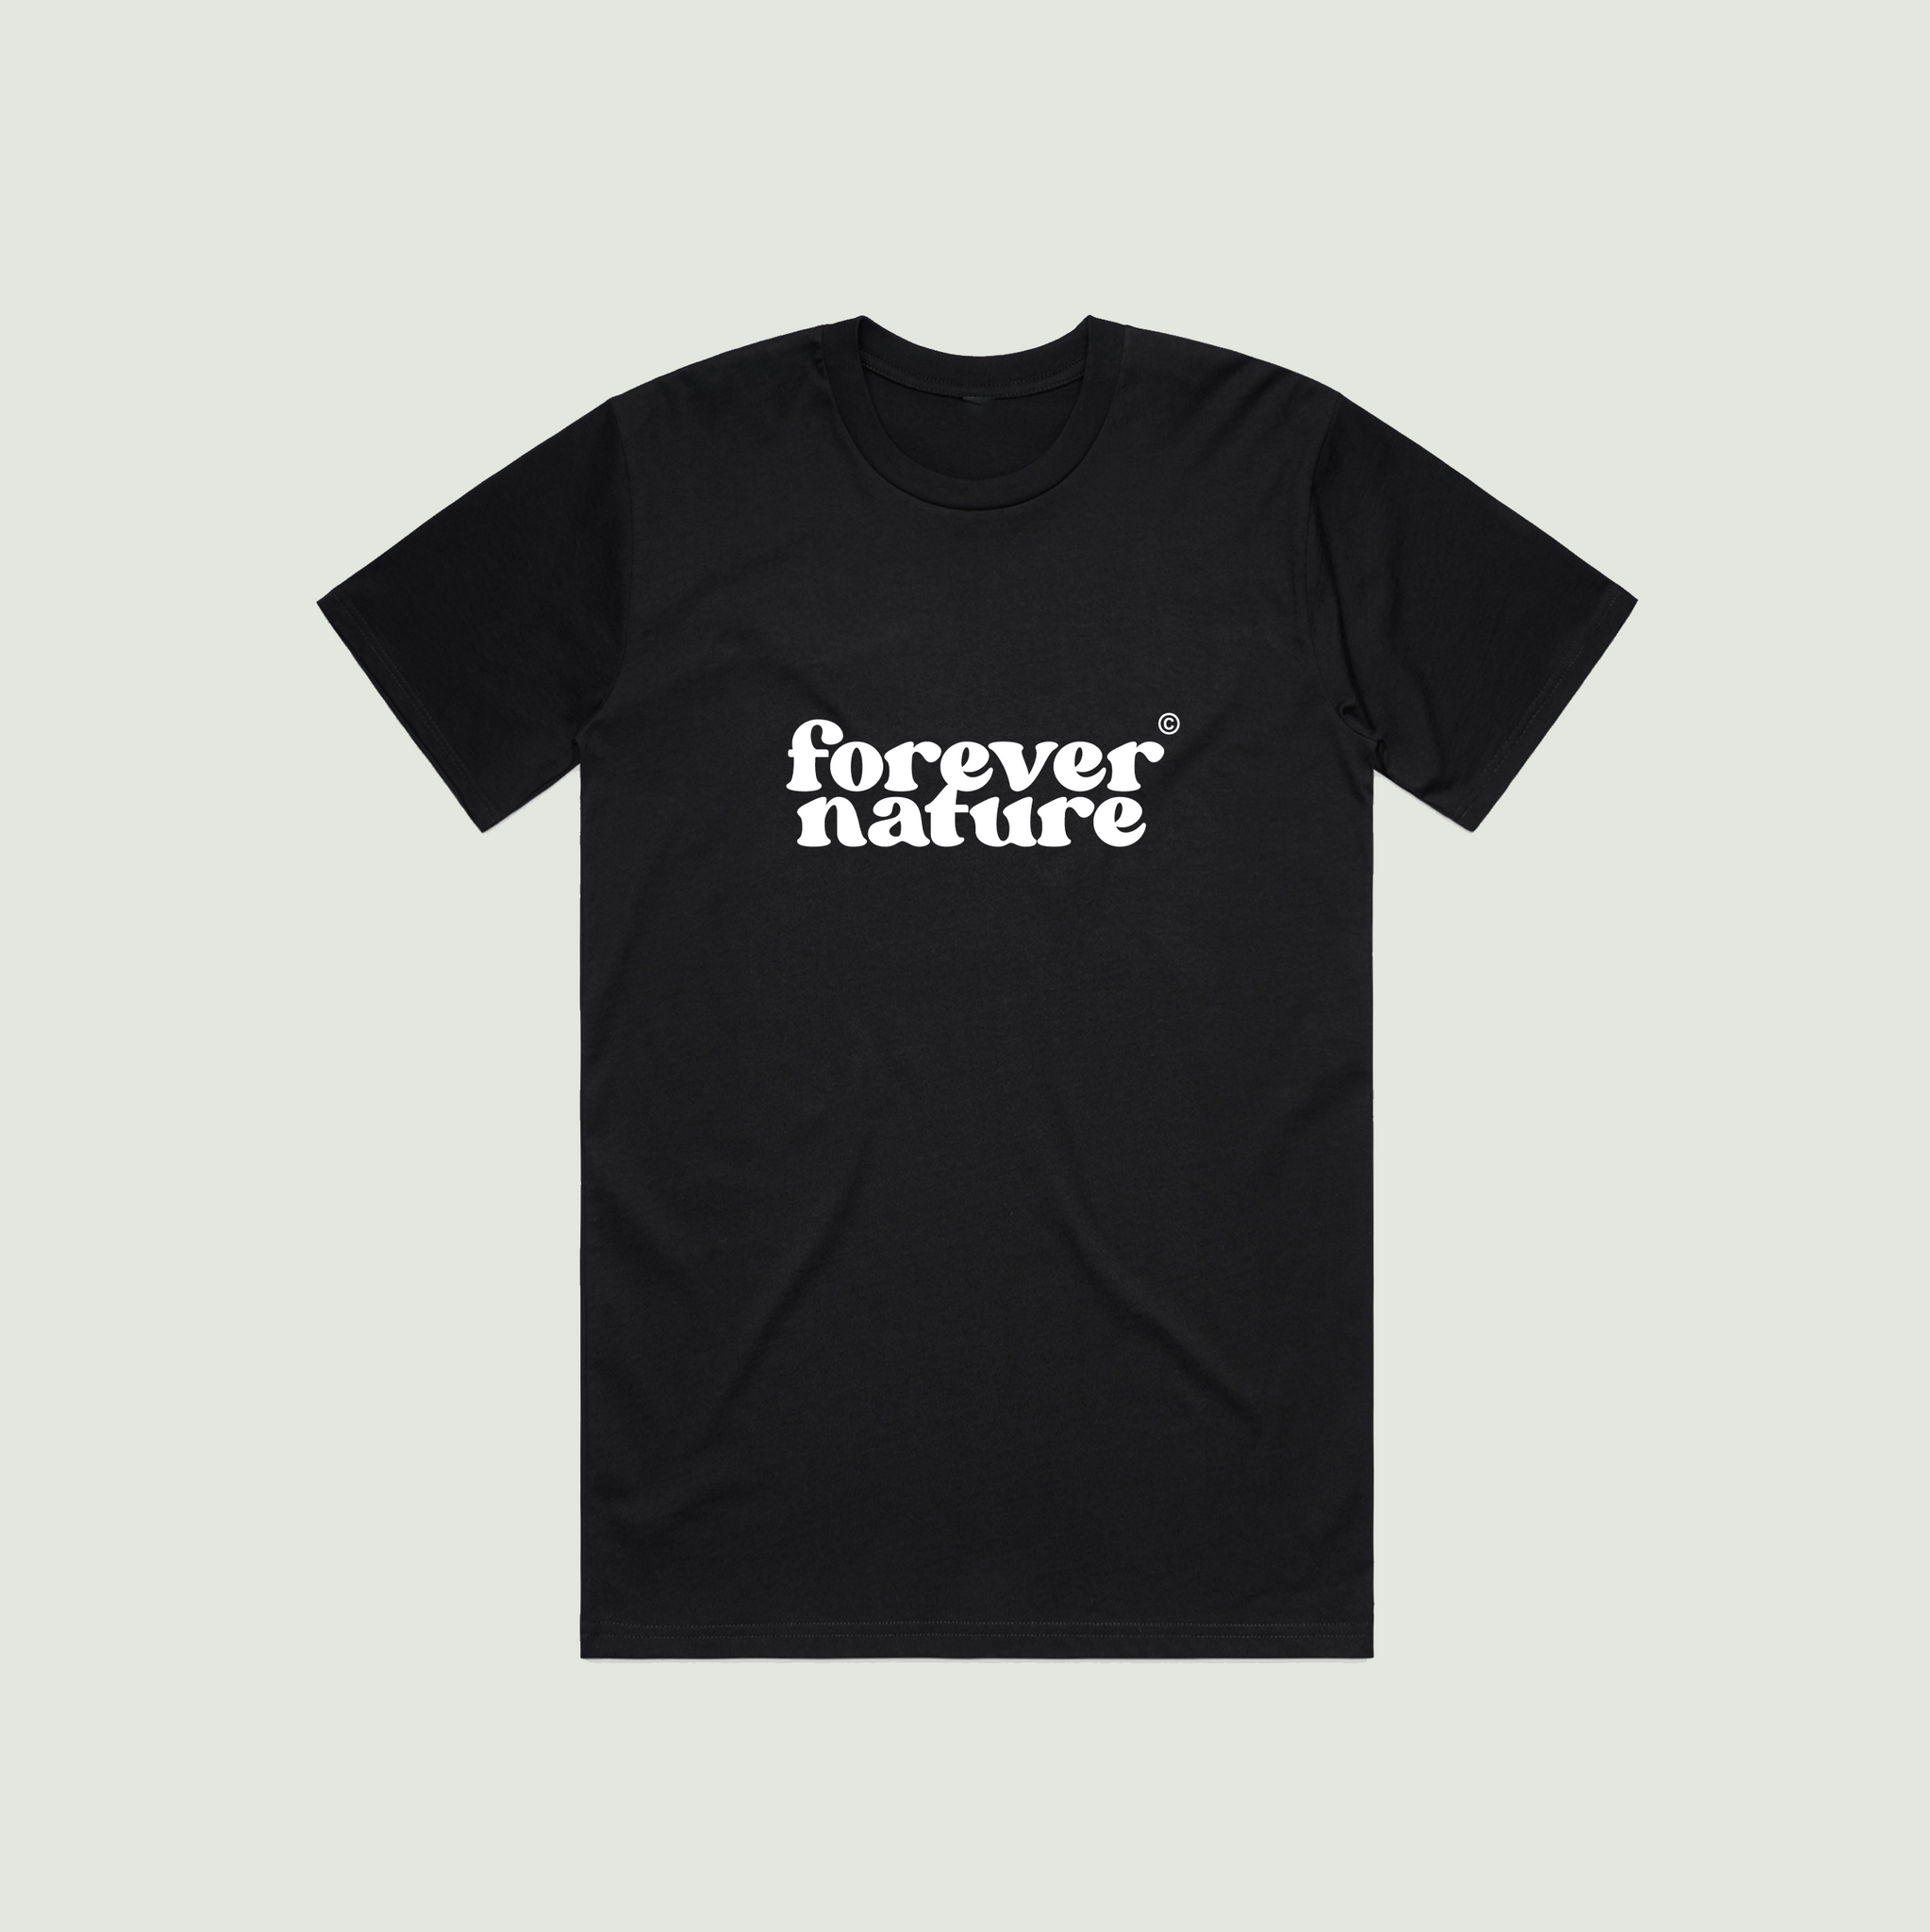 Forever Nature Tee in Black & White